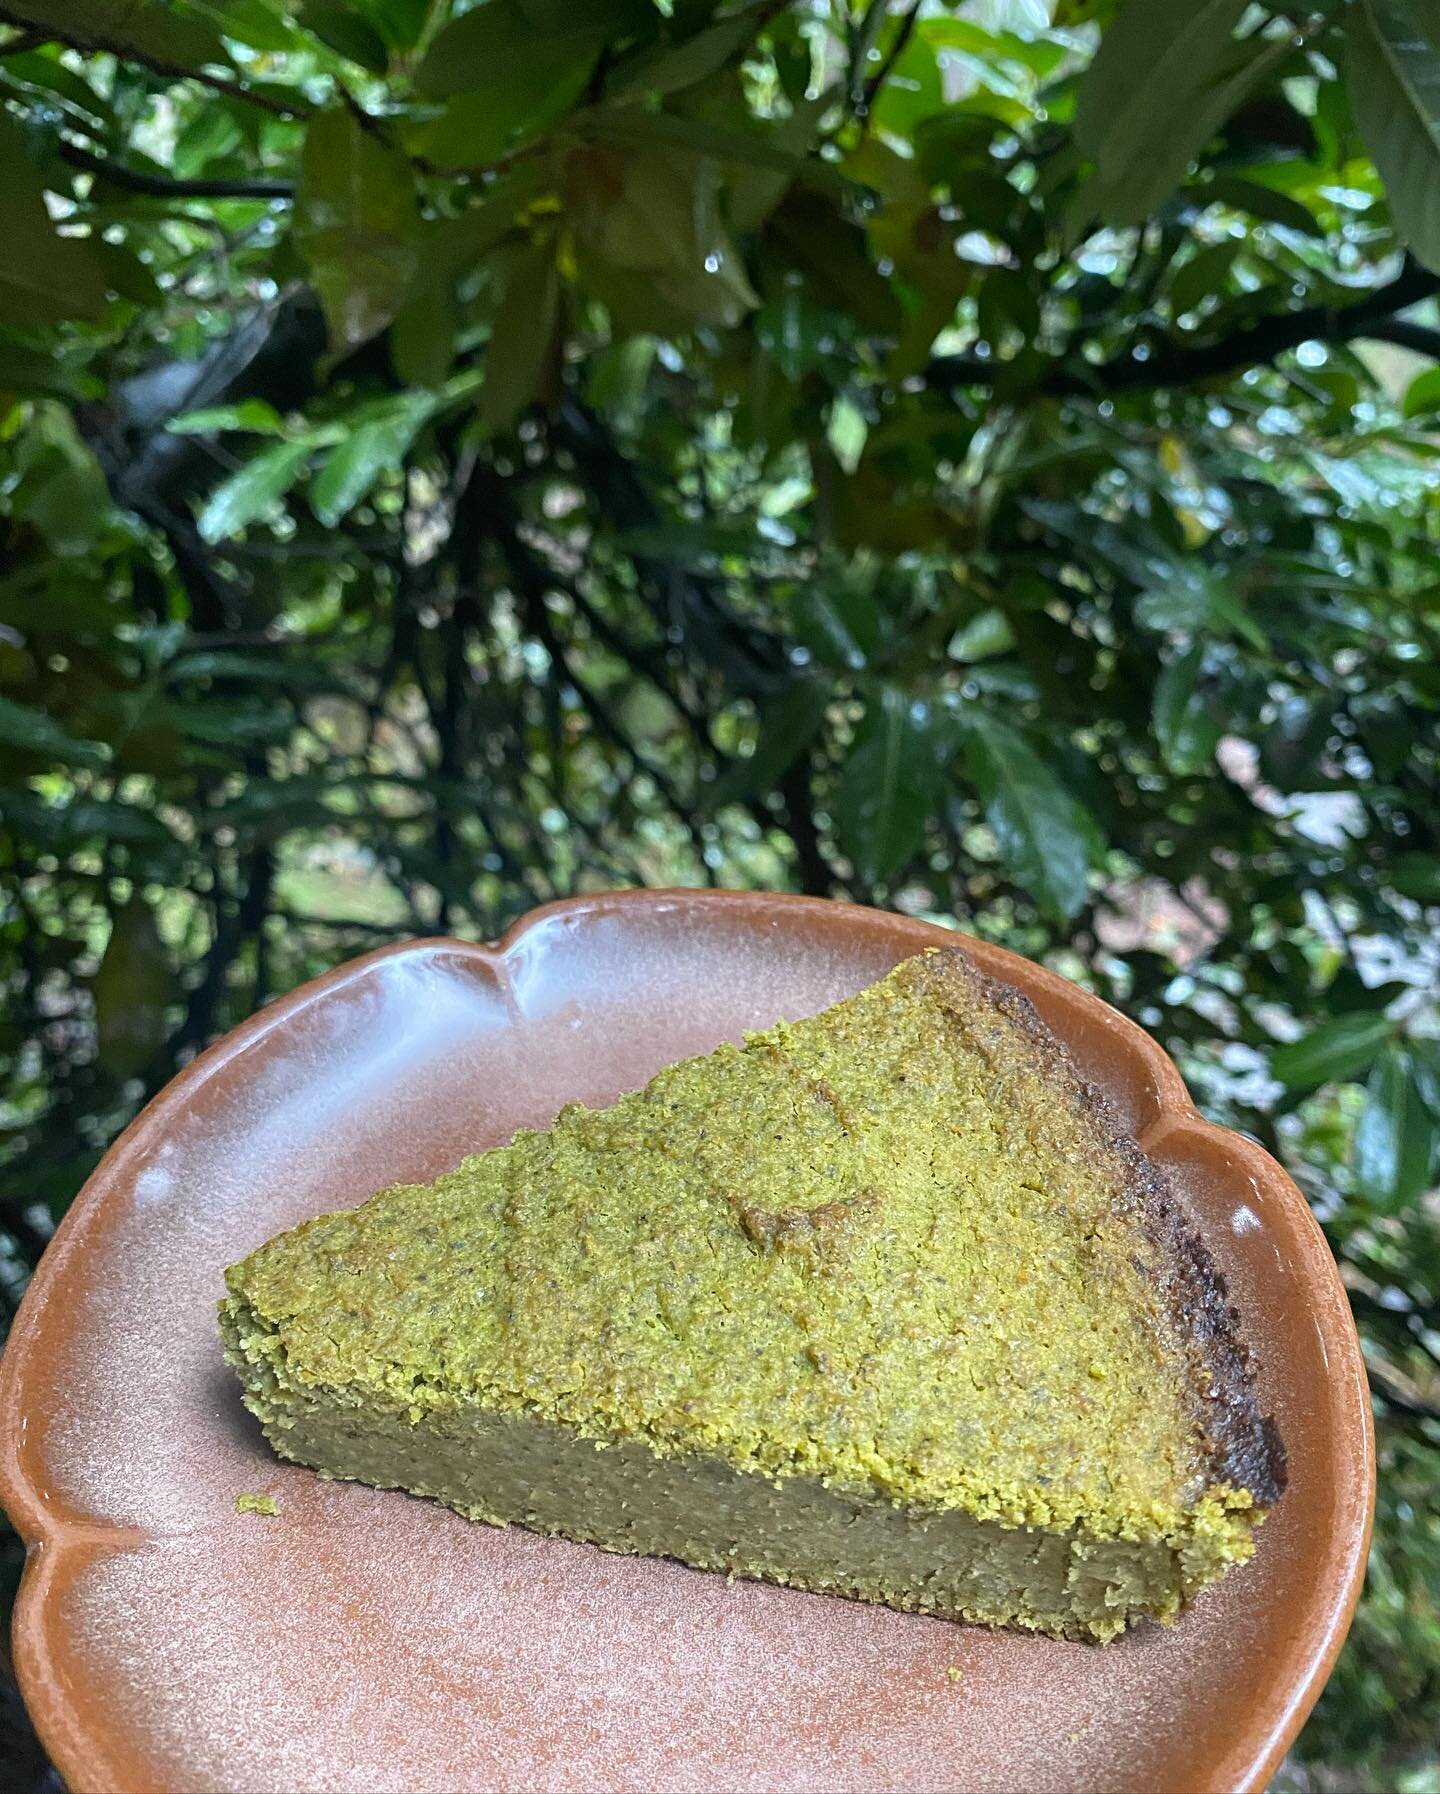 Nettle Cake 🌱 a favourite recipe for this time of year listed on my blog. Harvesting and cooking has been a grounding anchor in an otherwise uprooting spring. Between keeping an eye on the atrocities of the world right now and sitting with people in